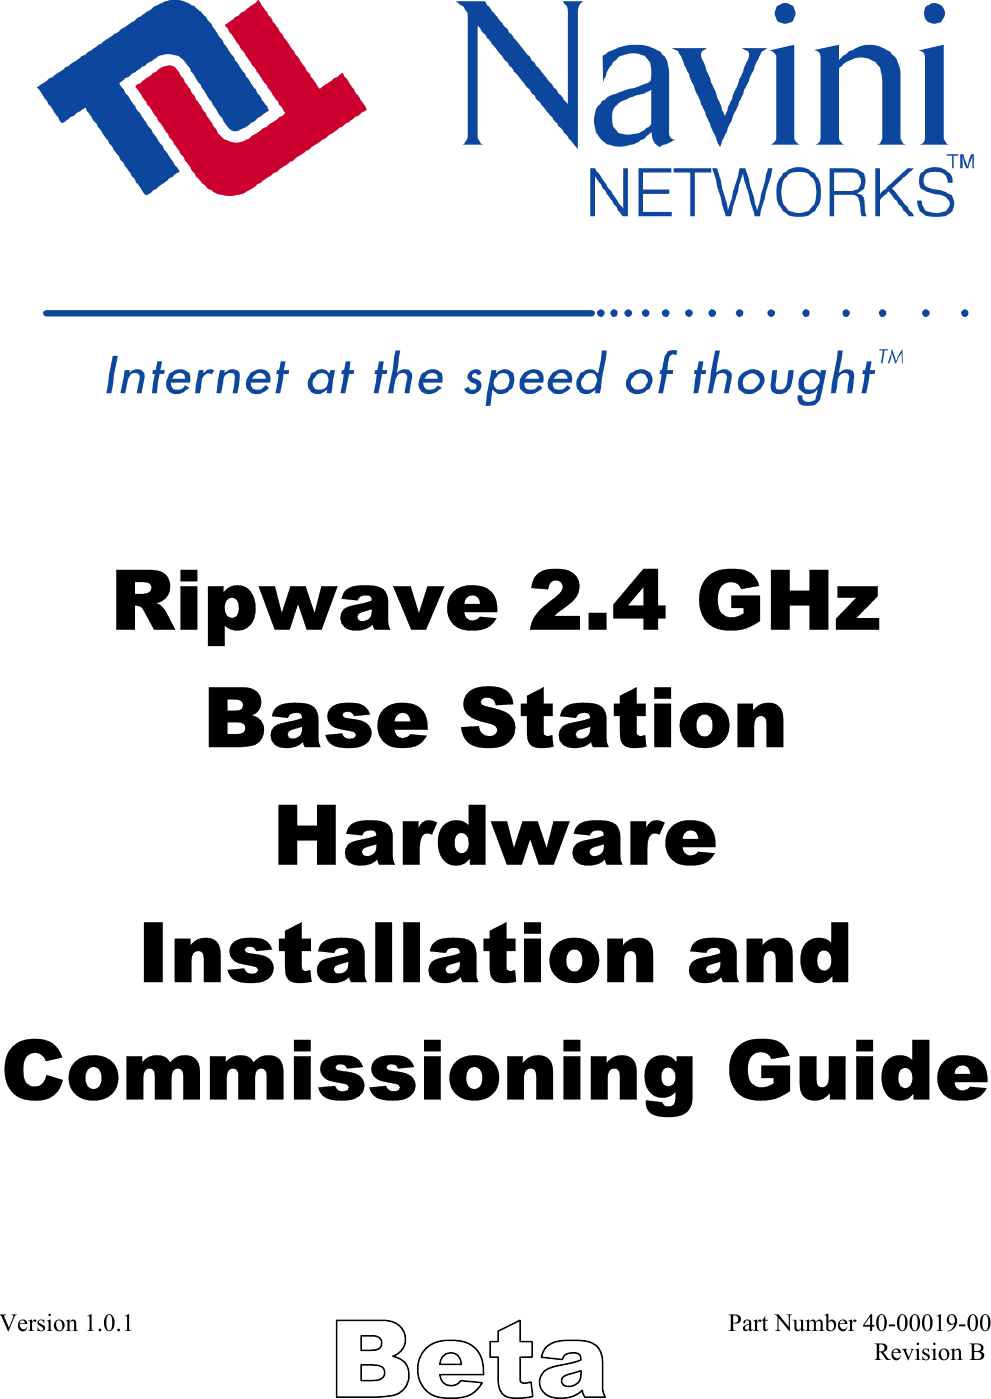            Ripwave 2.4 GHz  Base Station Hardware Installation and Commissioning Guide Version 1.0.1                                                                                               Part Number 40-00019-00                                                                                                                                             Revision B 